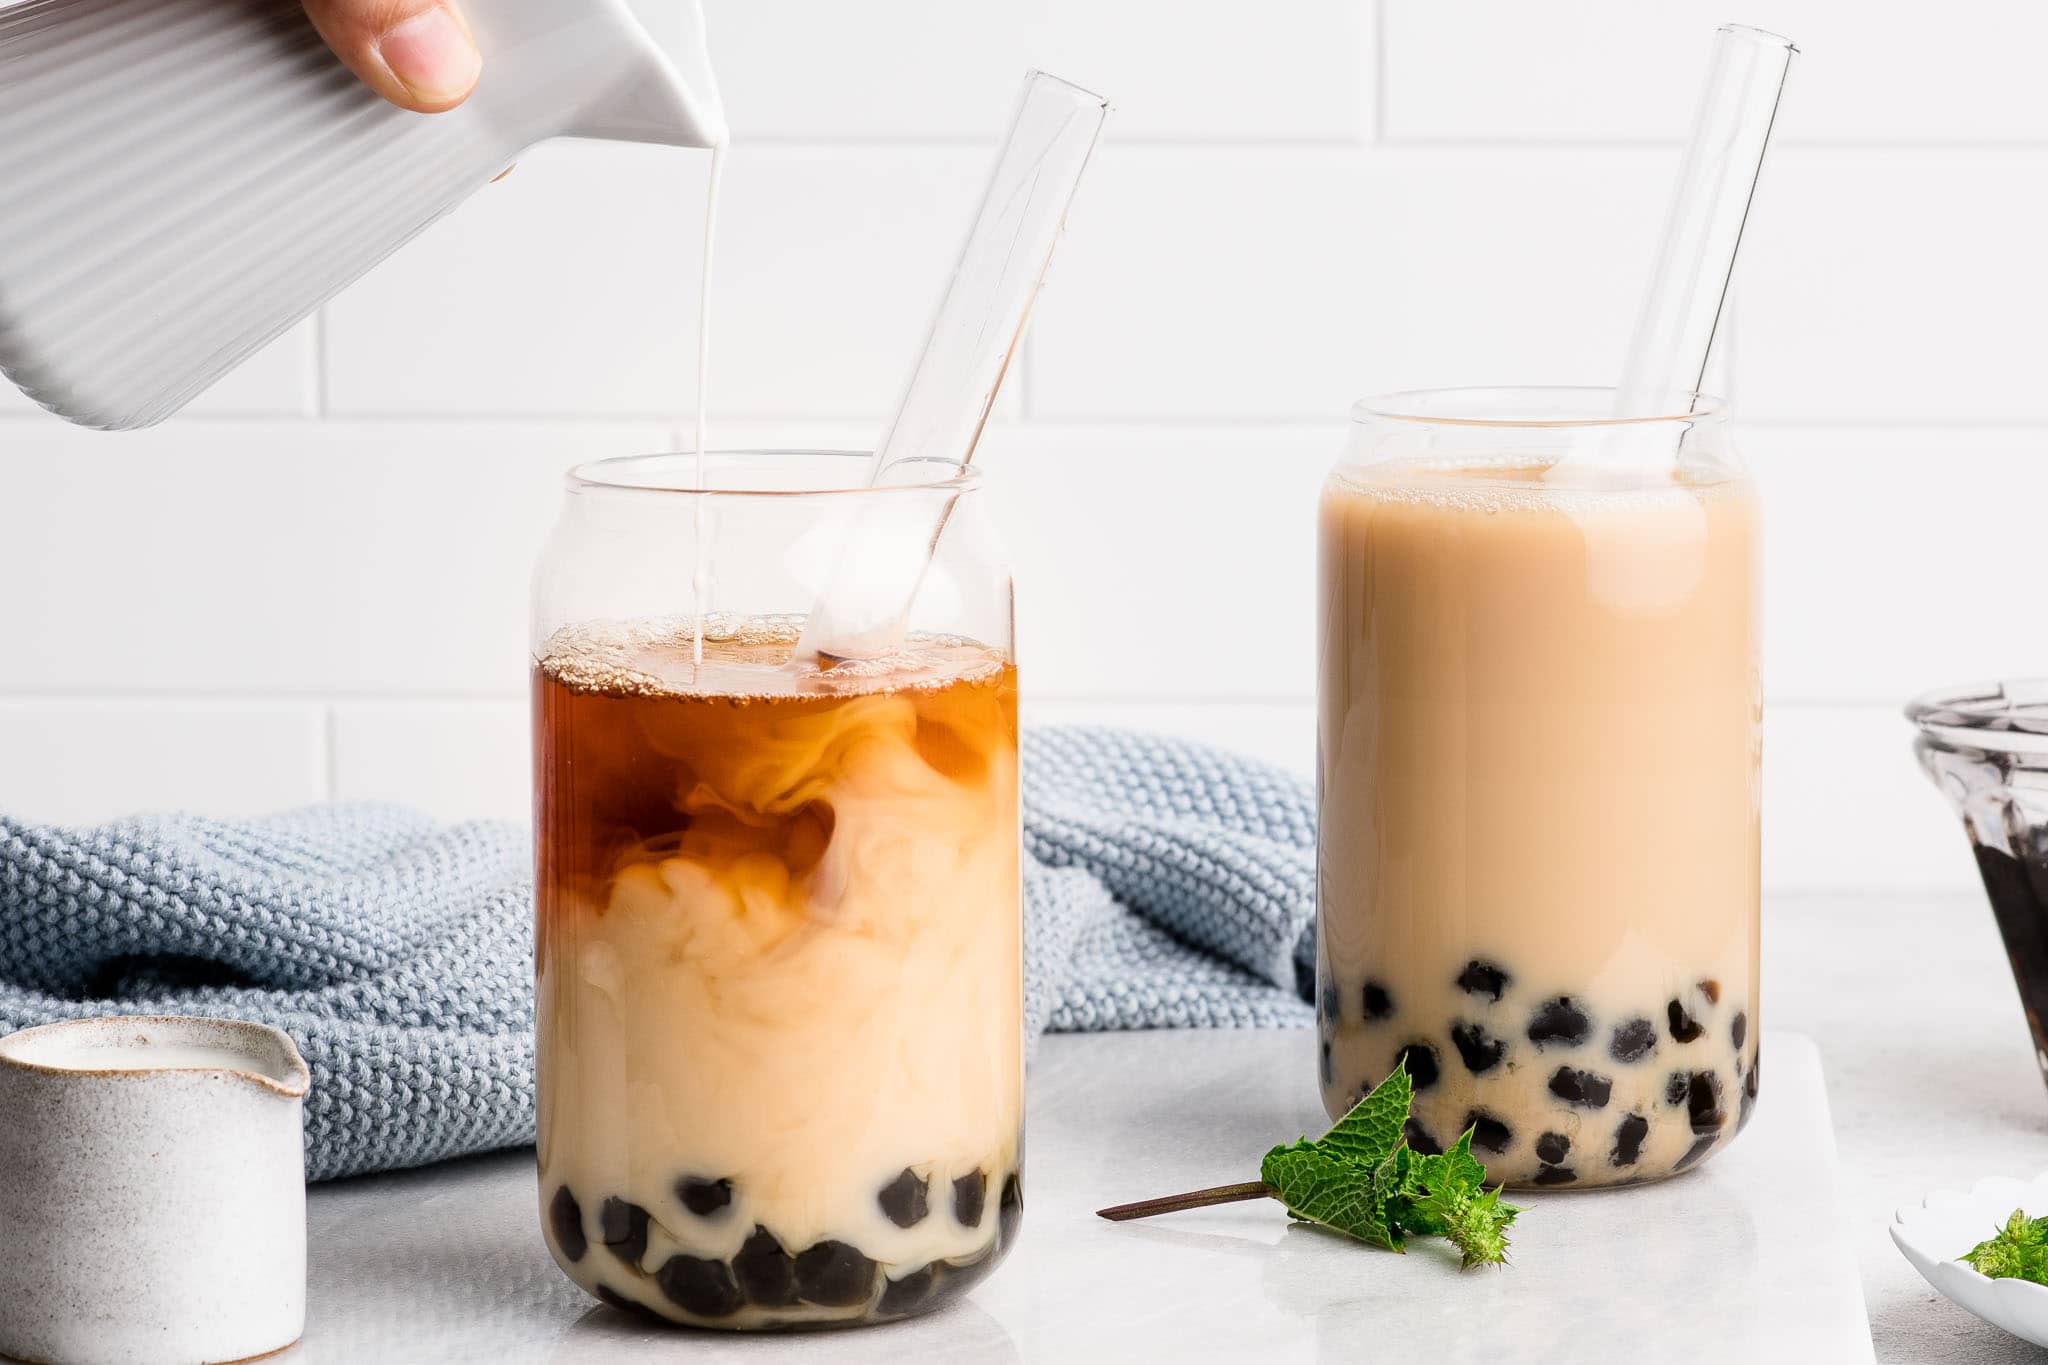 Ingredients Needed for Boba Coffee